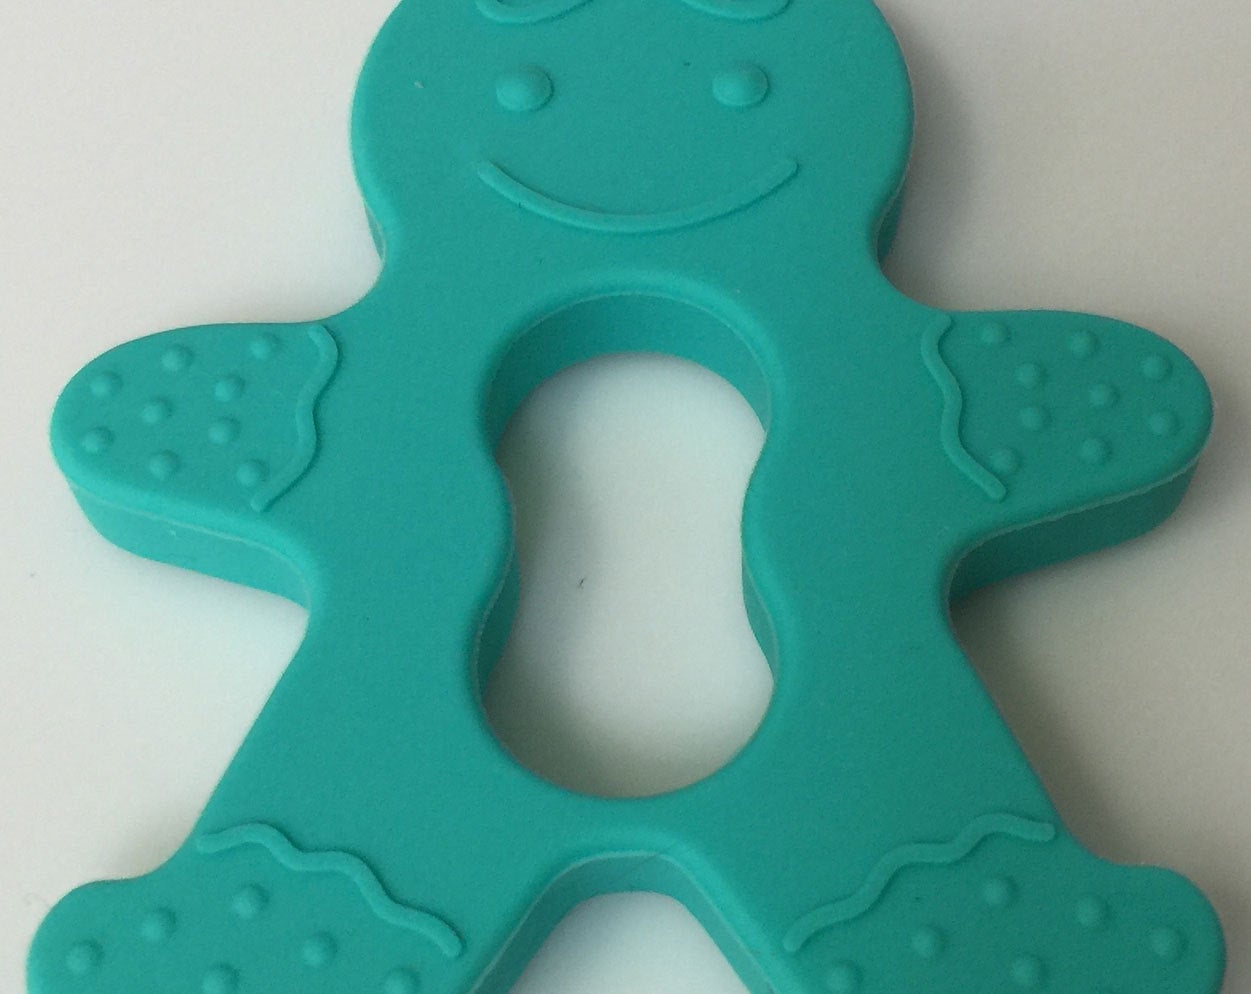 1 Silicone Gingerbread Teether / Pendant in Teal - Silicone Teething, Silicone Teether, Teething Pendant